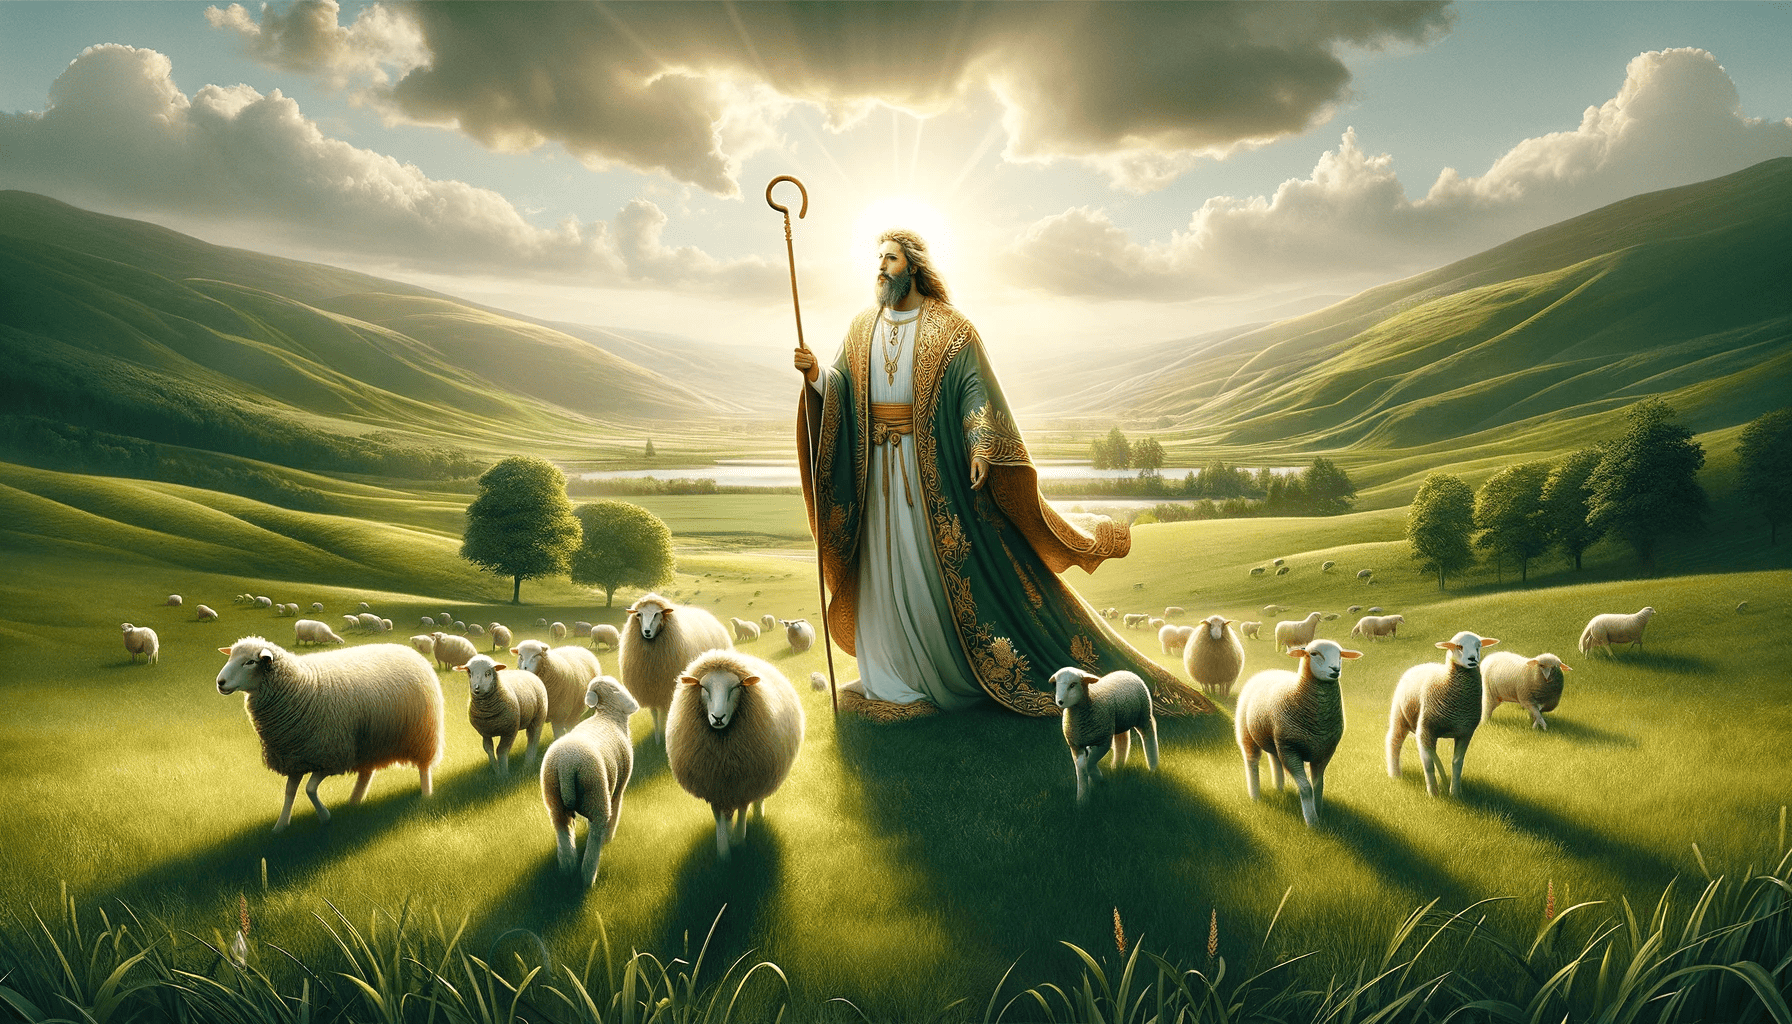 What Happens If The Lord is Your Shepherd